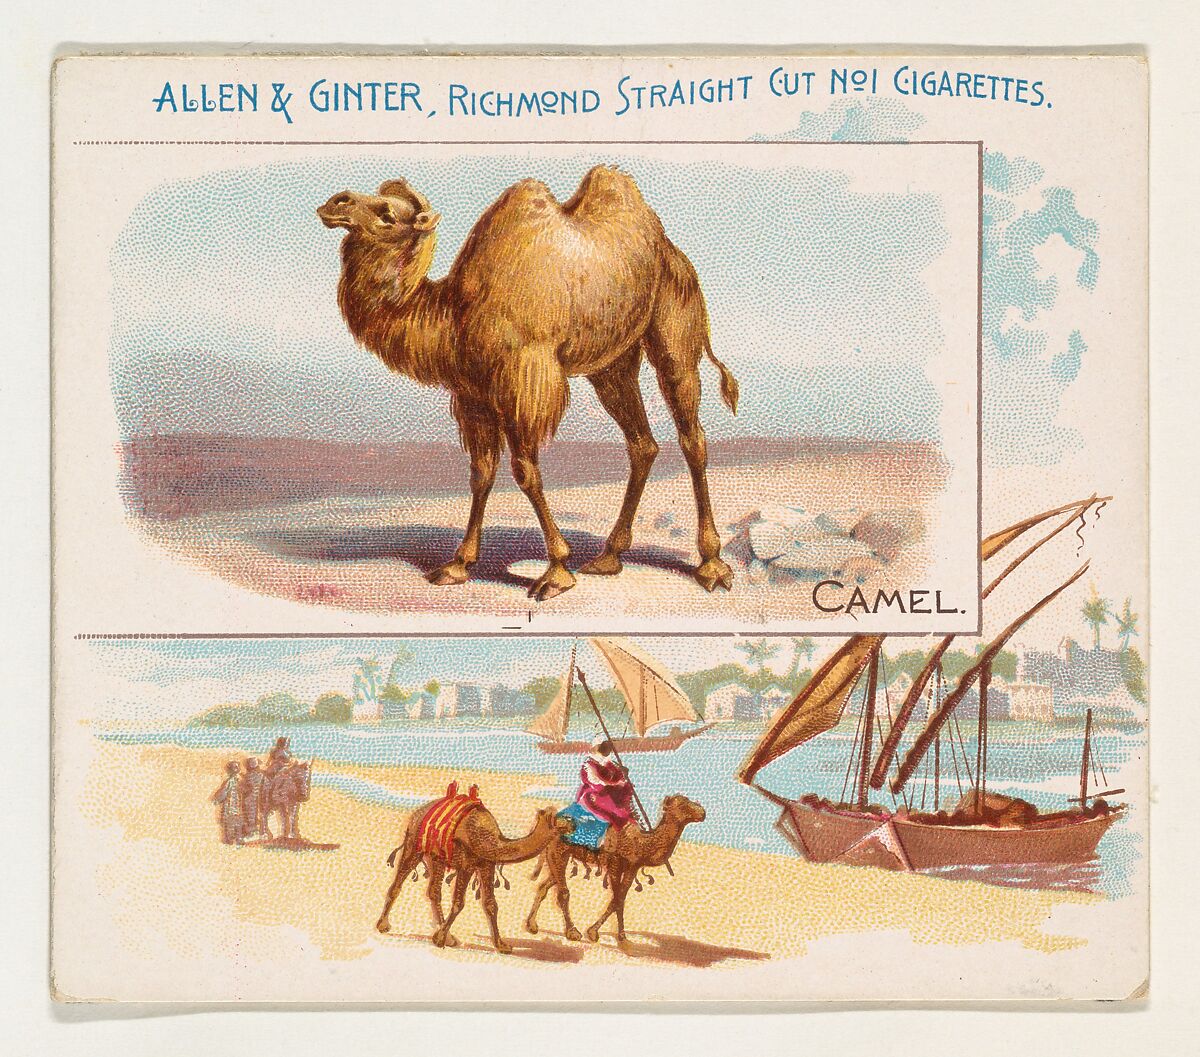 Camel, from Quadrupeds series (N41) for Allen & Ginter Cigarettes, Issued by Allen &amp; Ginter (American, Richmond, Virginia), Commercial color lithograph 